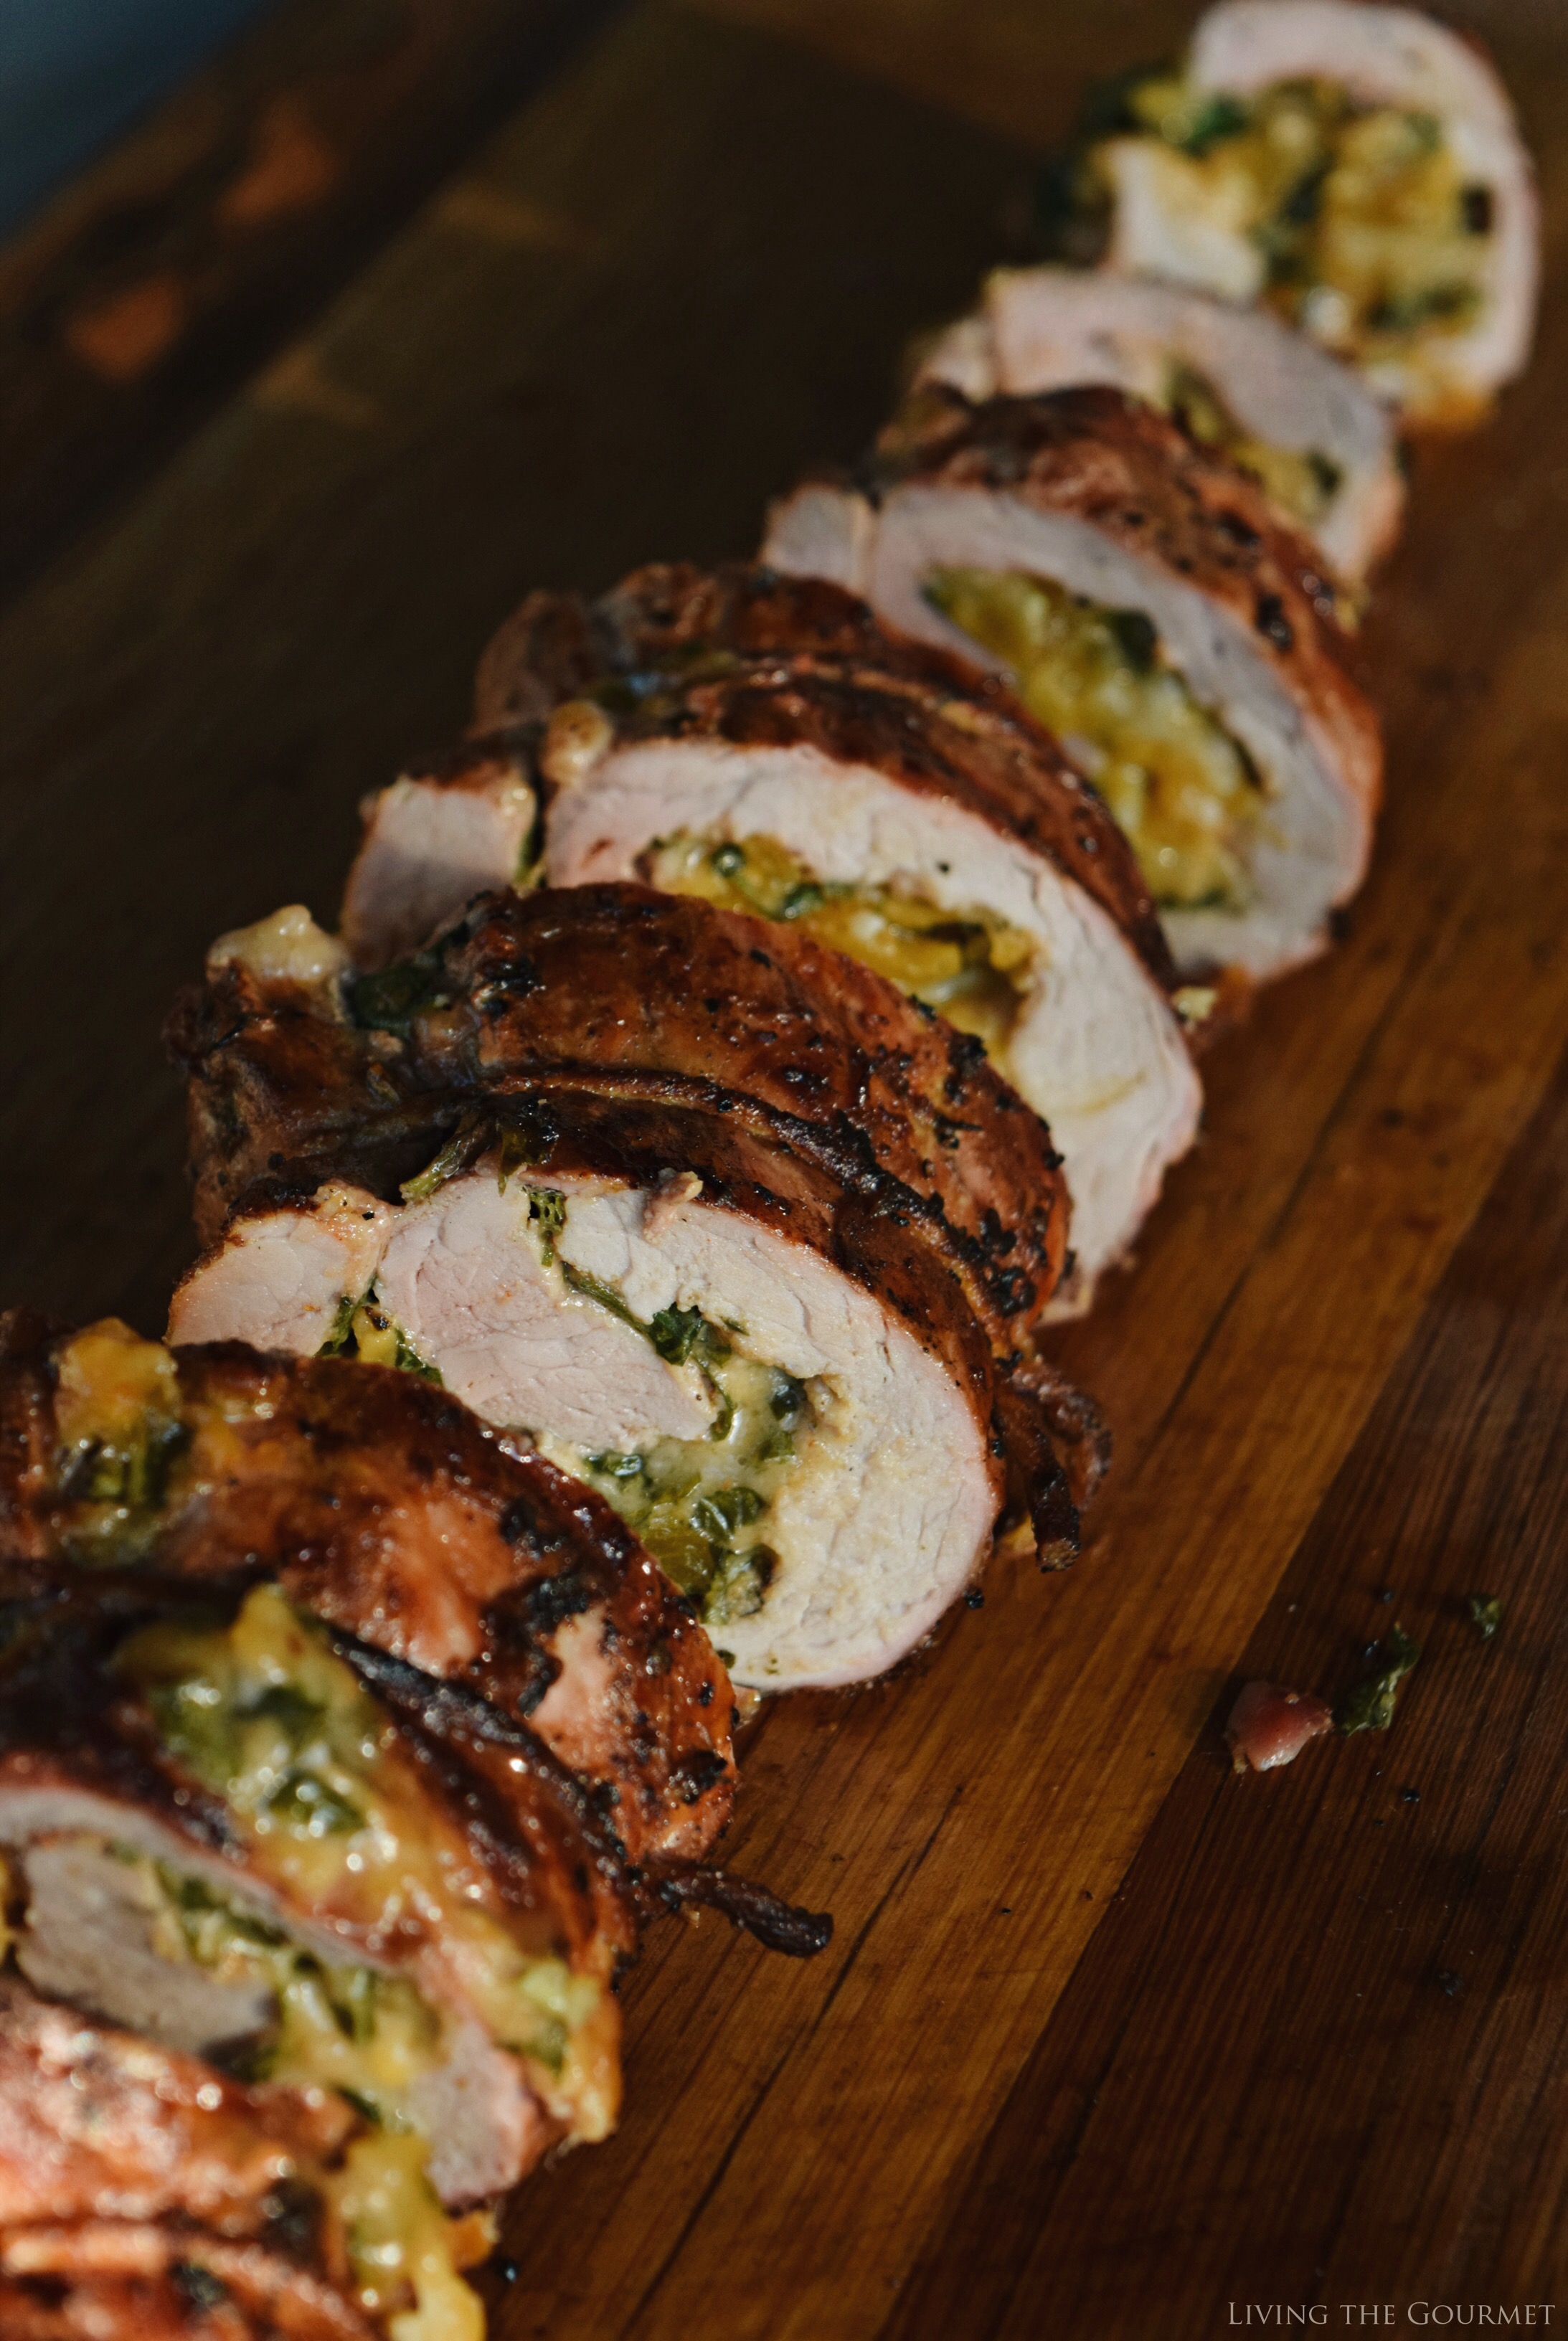 Living the Gourmet: Stuffed Pork Loin with Apricots, Basil, Garlic and Cheddar